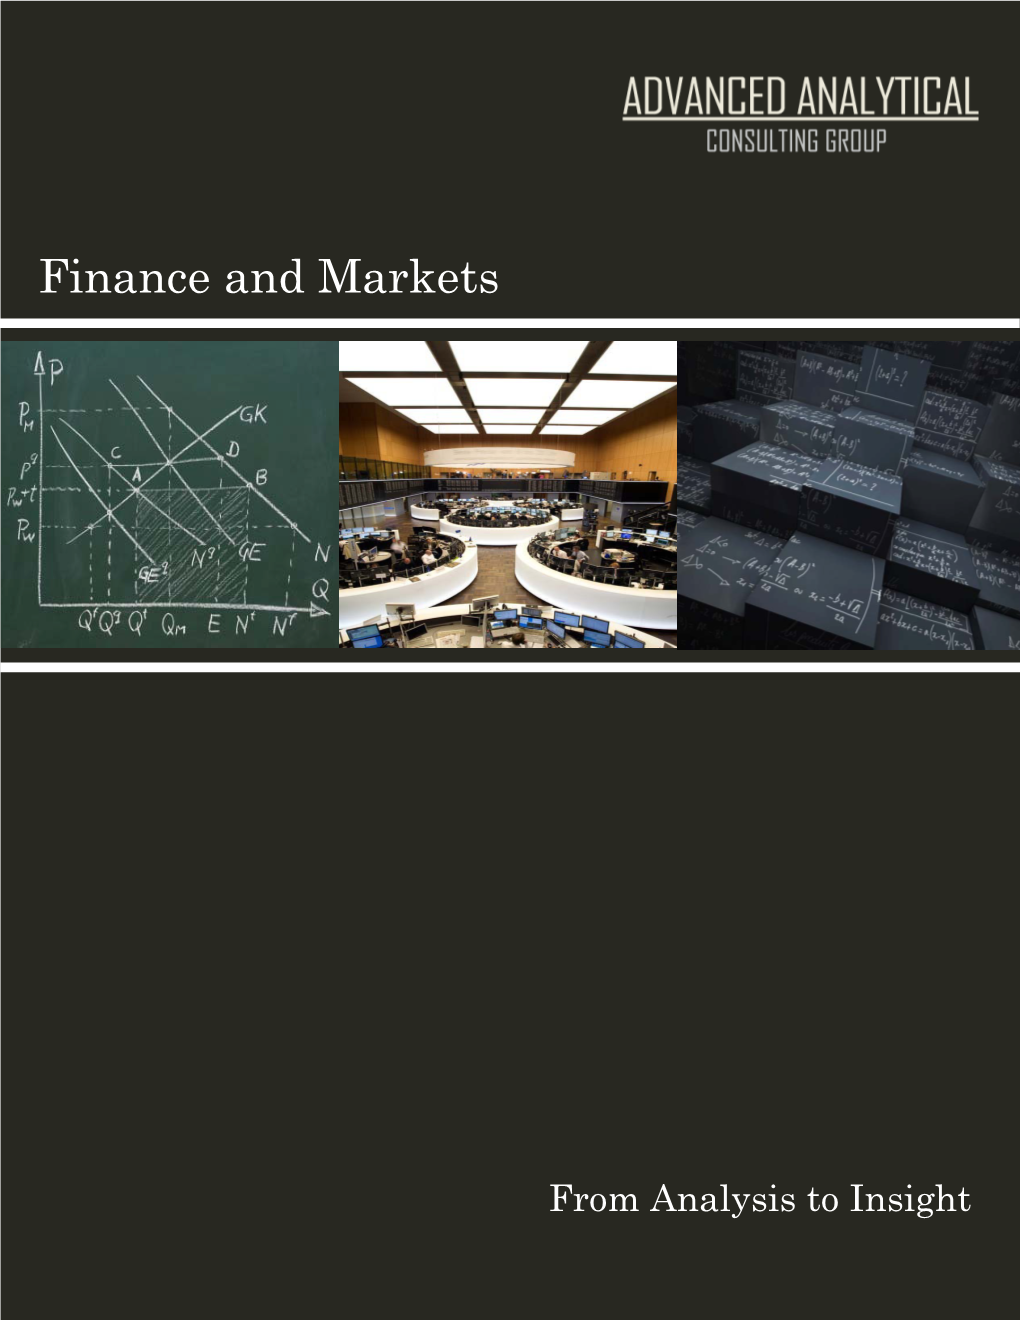 Finance and Markets Brochure